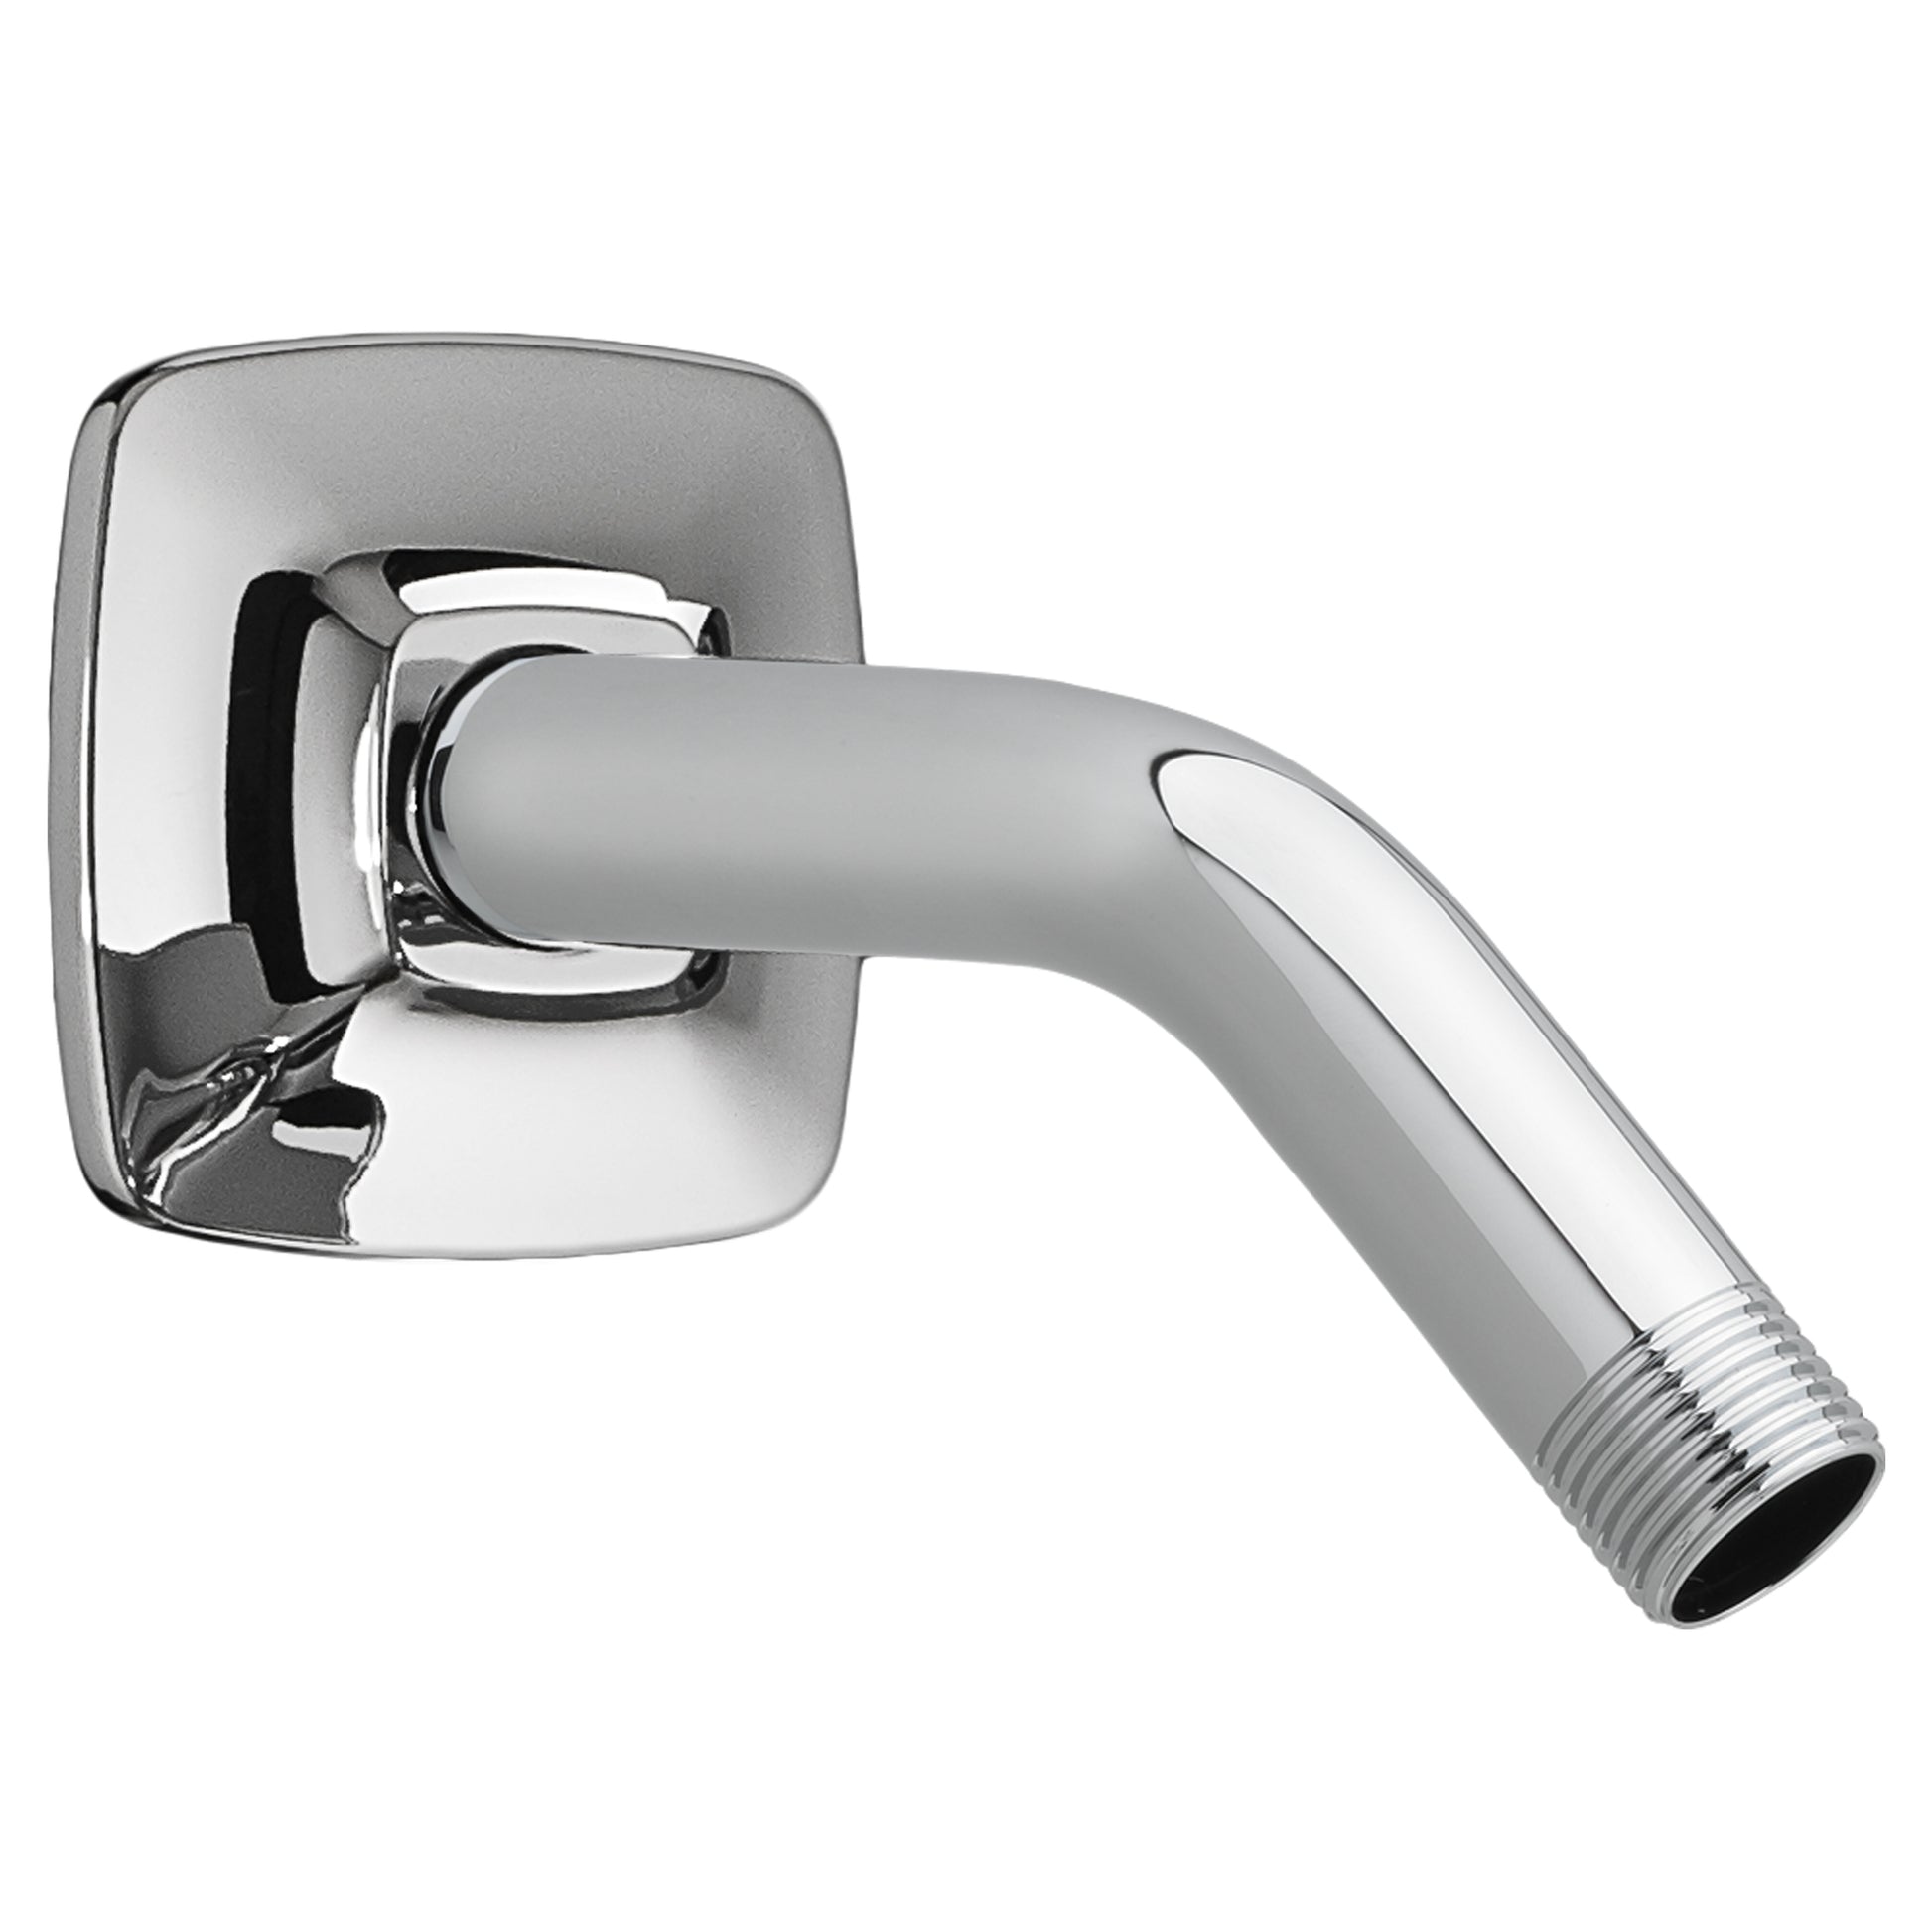 AMERICAN-STANDARD 1660245.002, Townsend Showerhead Arm and Flange in Chrome